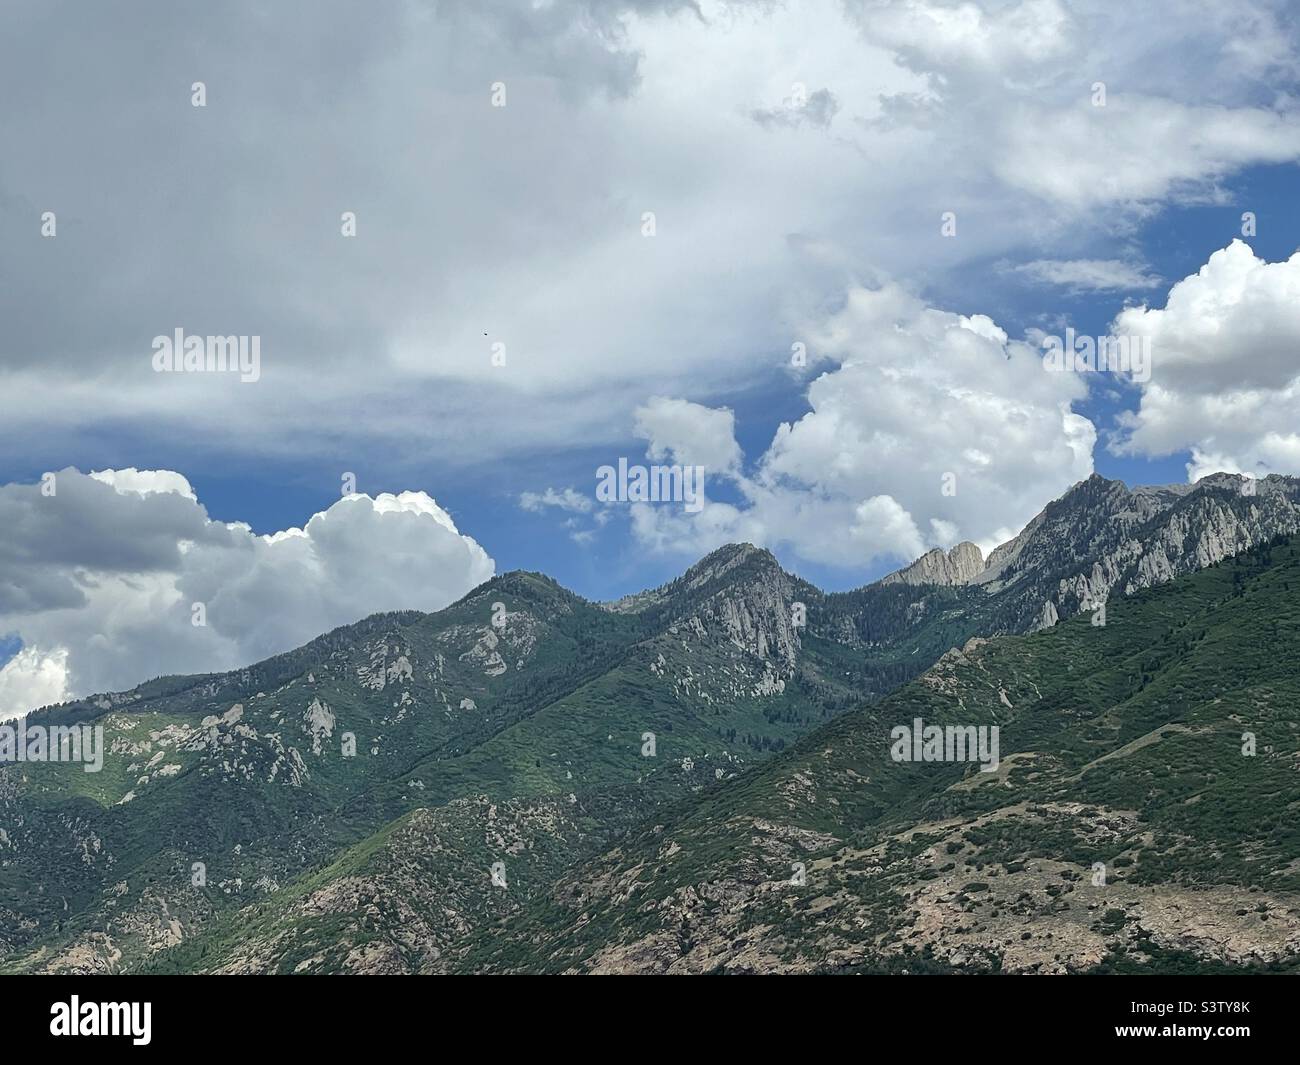 A summer’s day looking up at the Wasatch mountains, the western edge of the greater Rocky Mountain range, just east of the Salt Lake valley in Utah, USA. Stock Photo